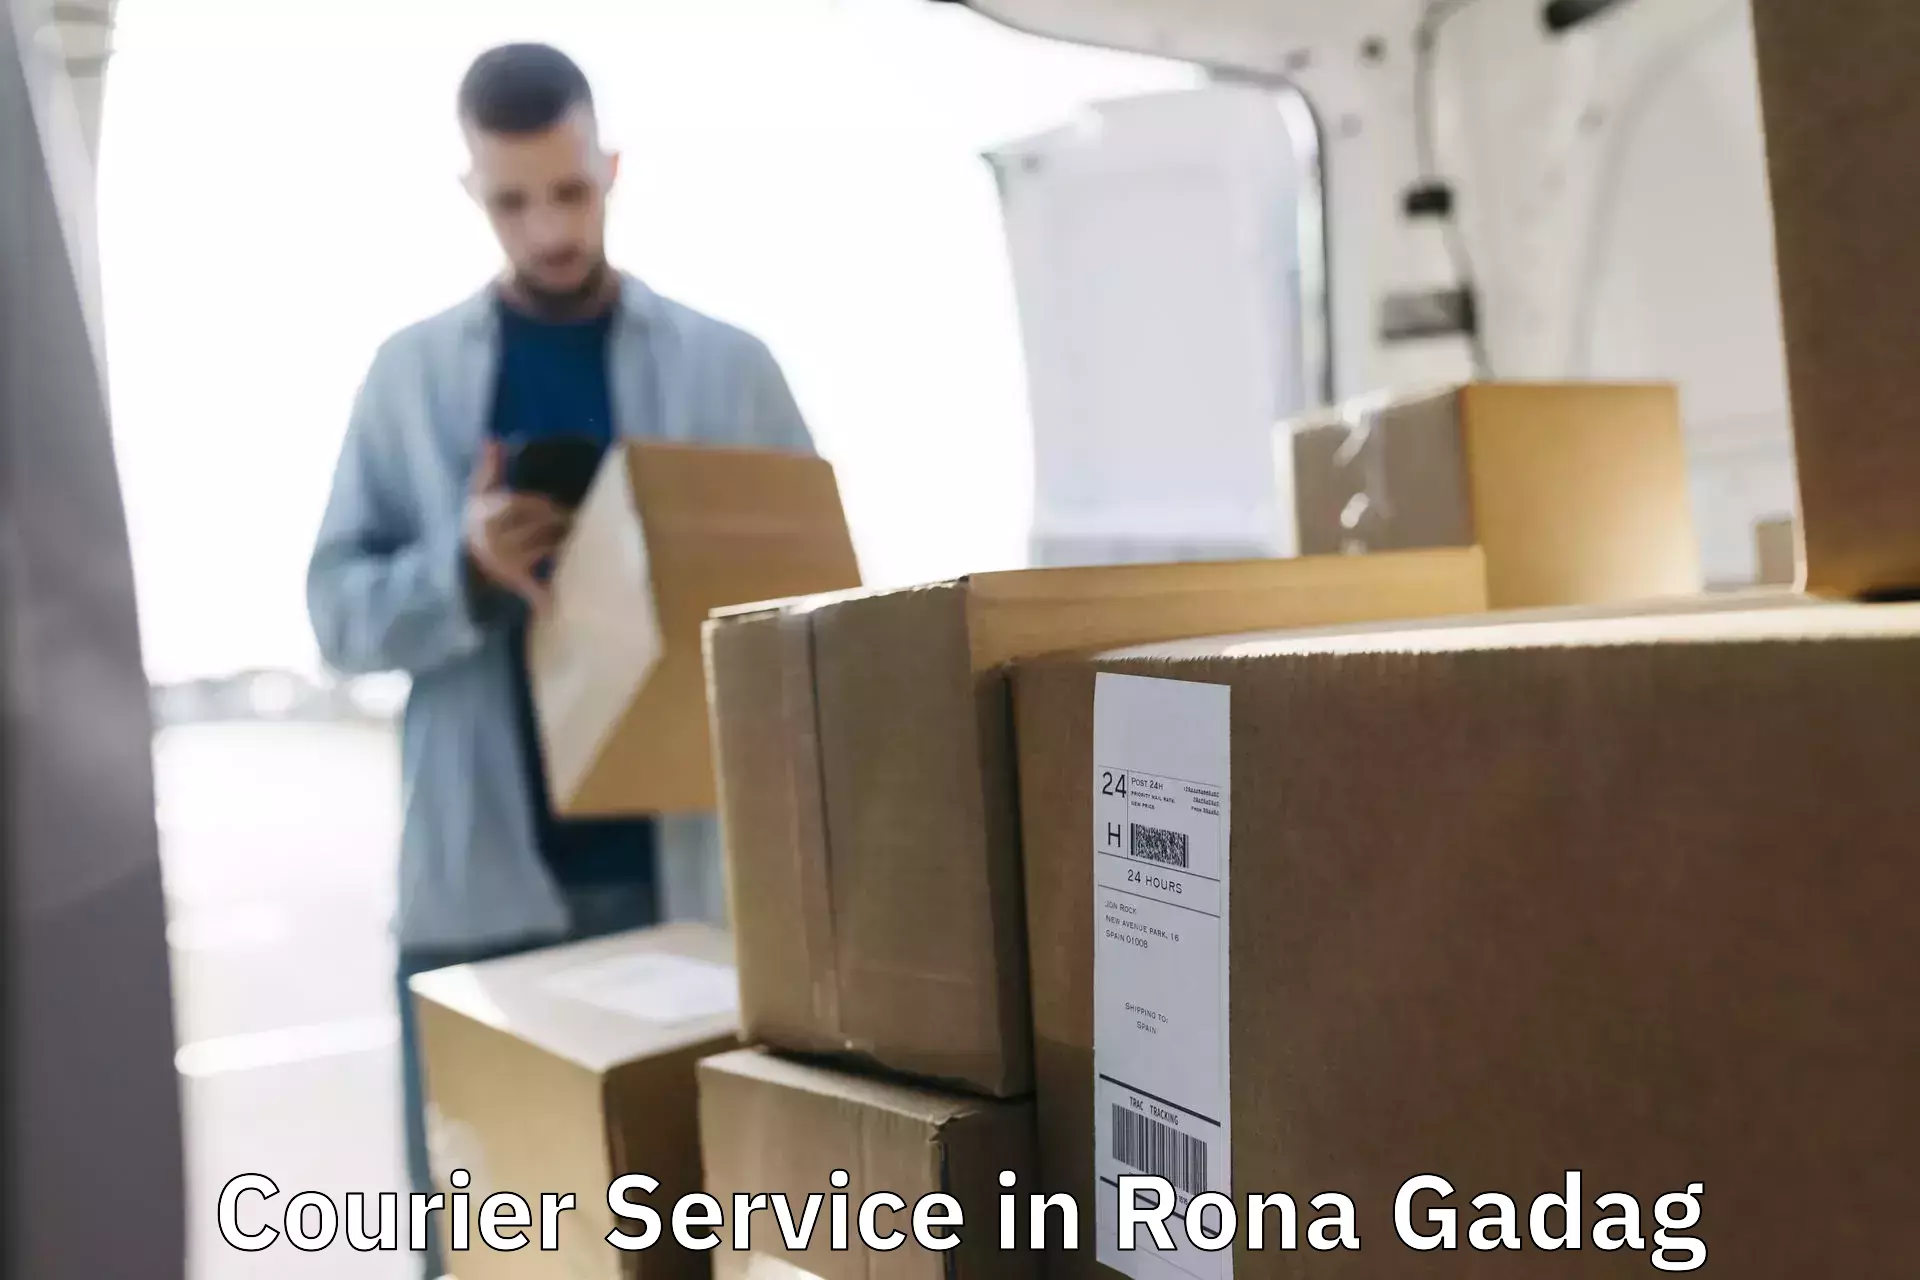 Nationwide courier service in Rona Gadag